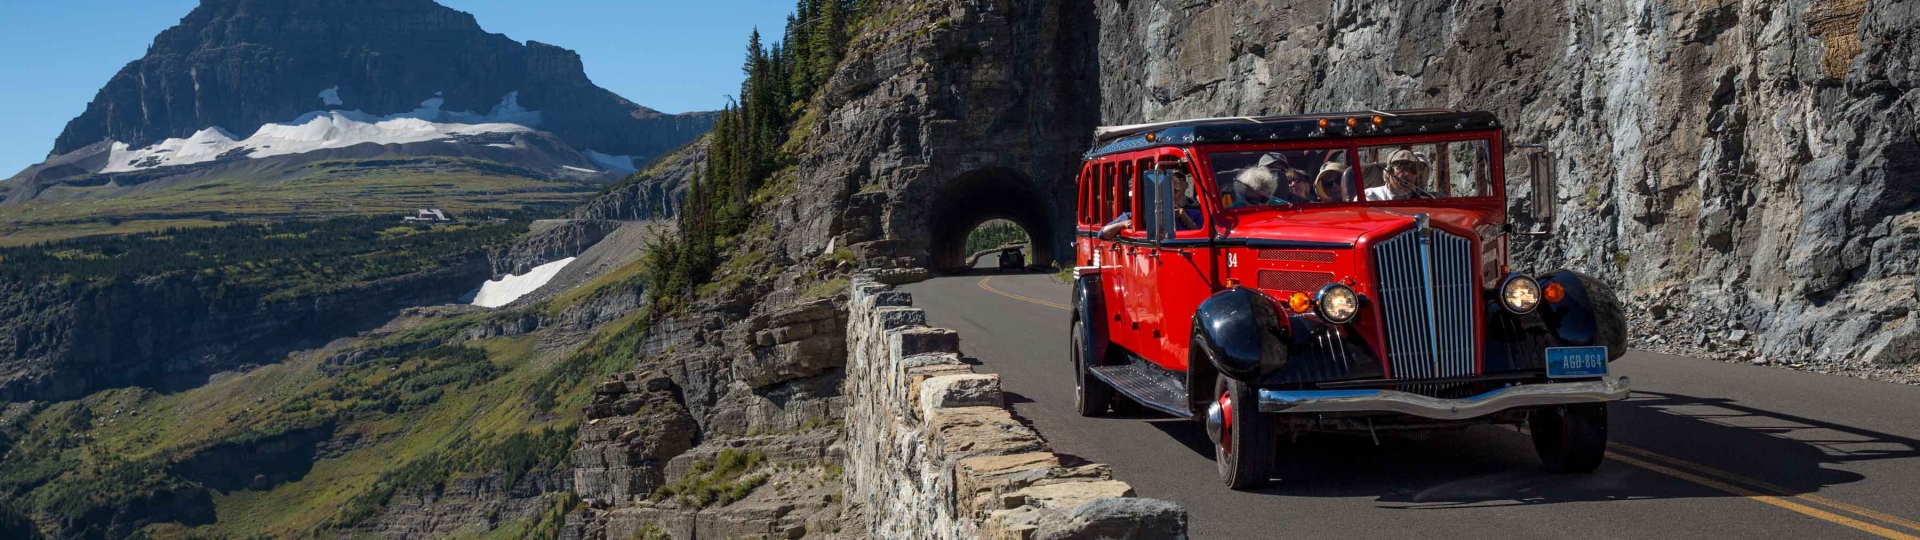 5 National Parks You Can Visit by Bus